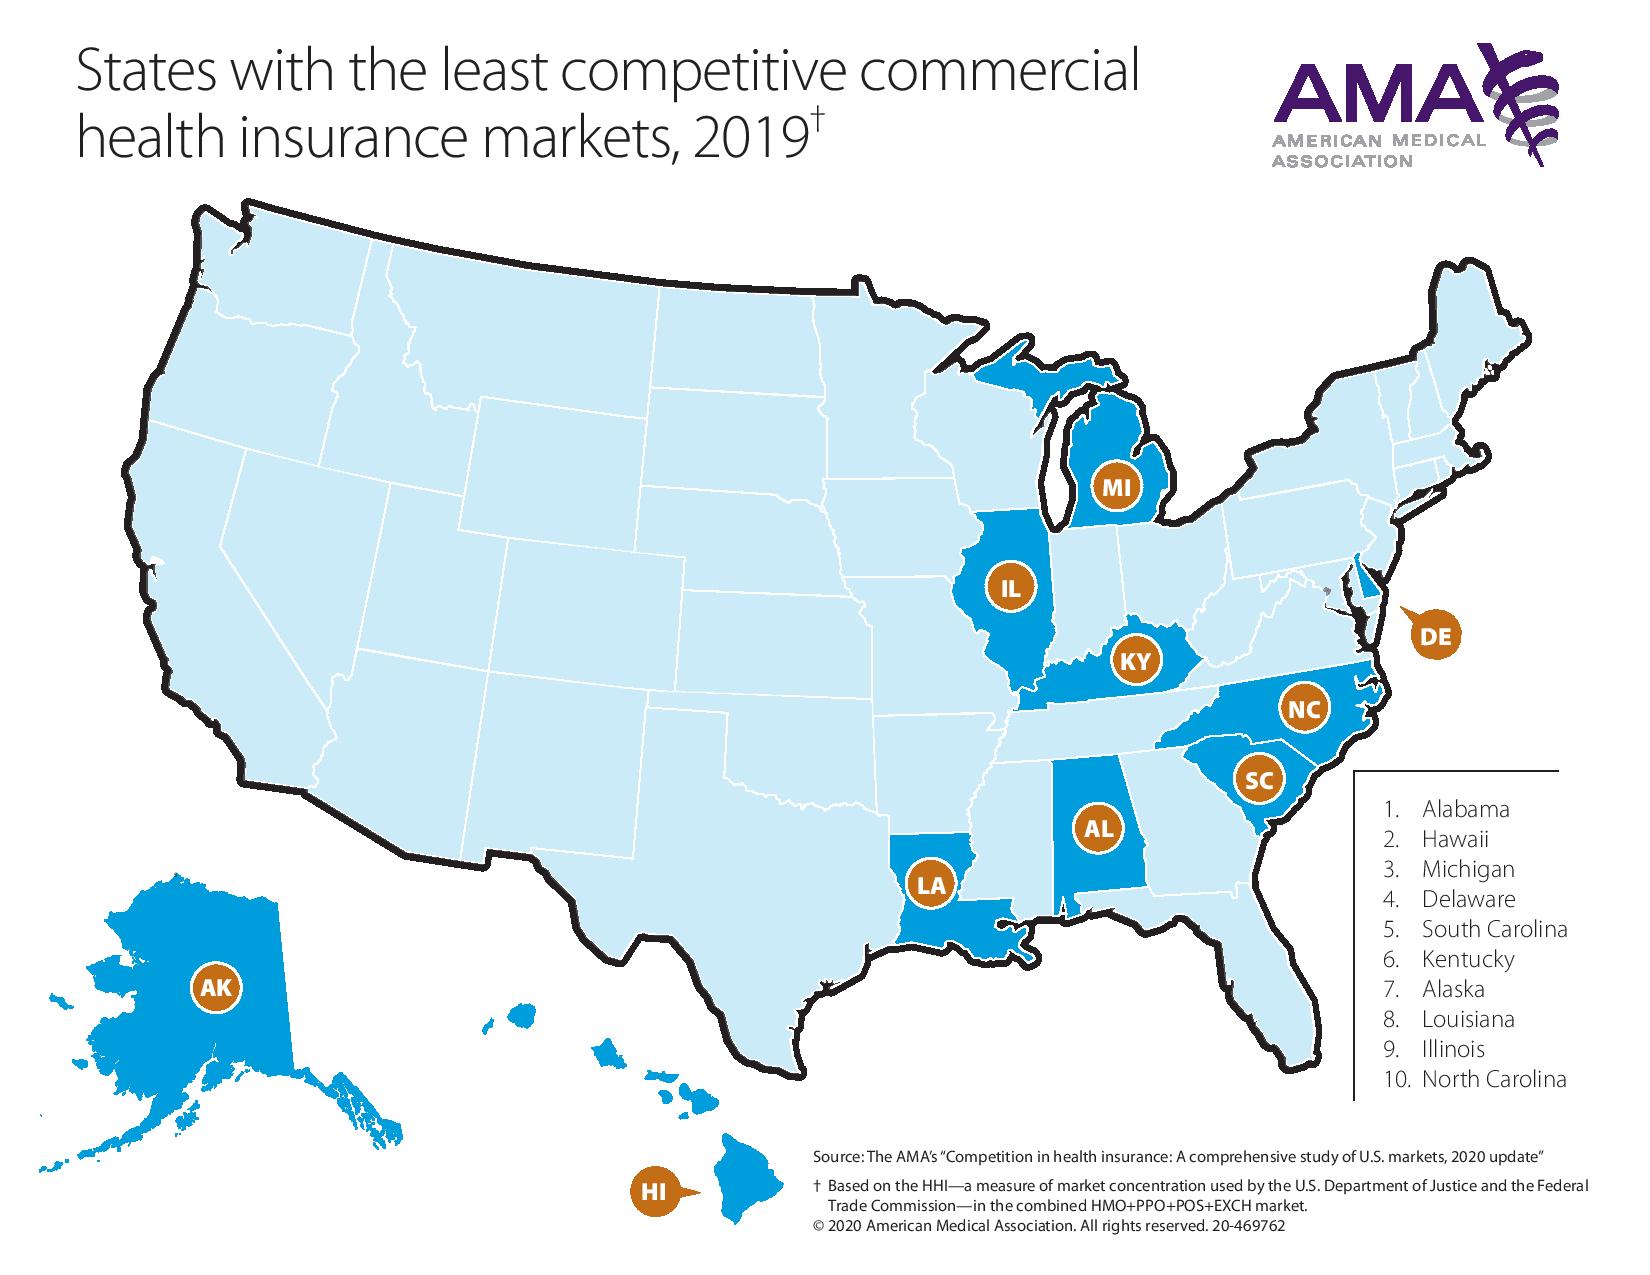 States with the Least Competitive Markets, 2019